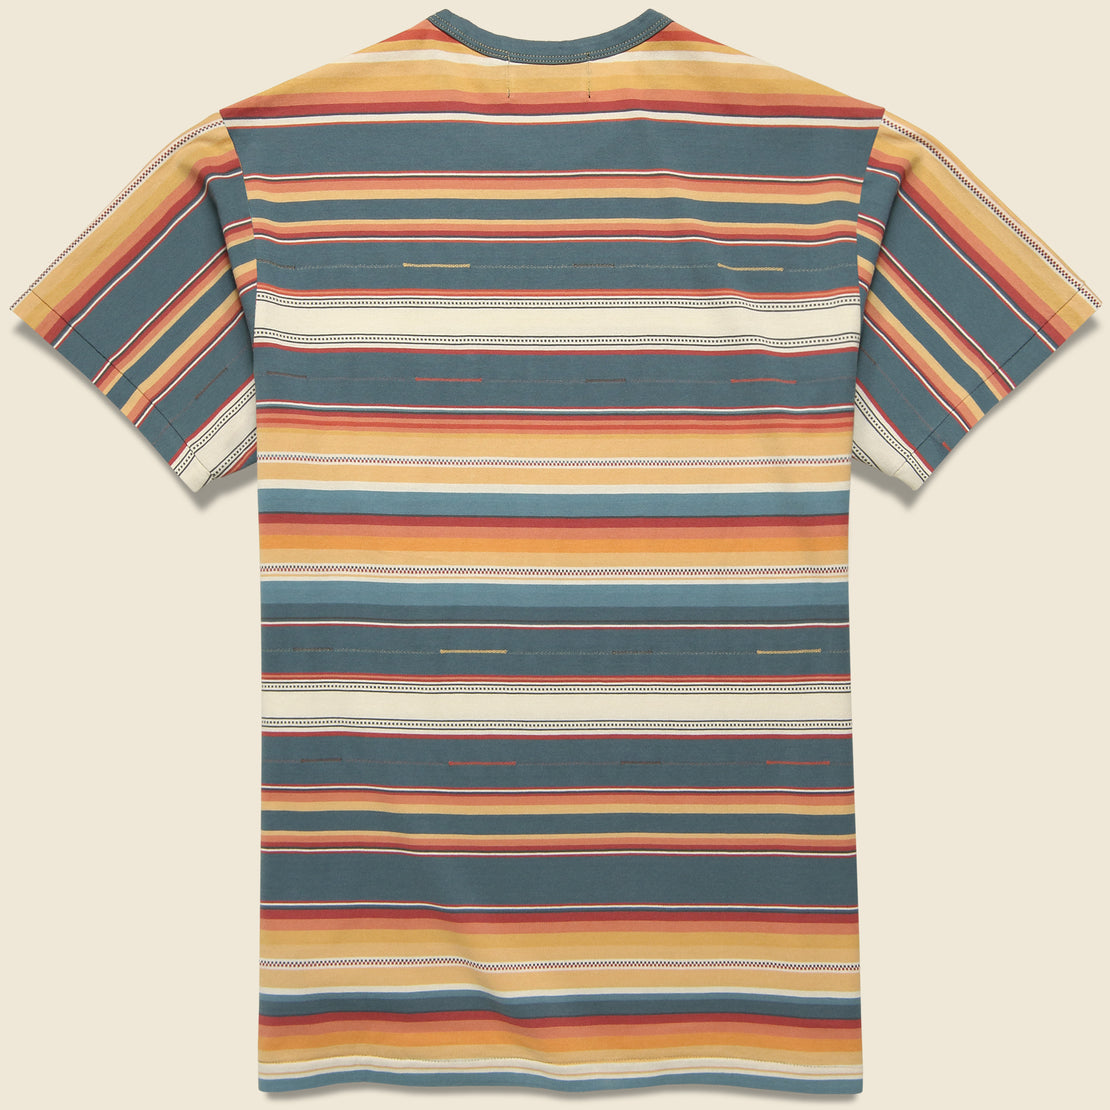 Southwest Stripe Pocket Tee - Turquoise/Red/Cream/Multi - RRL - STAG Provisions - Tops - S/S Tee